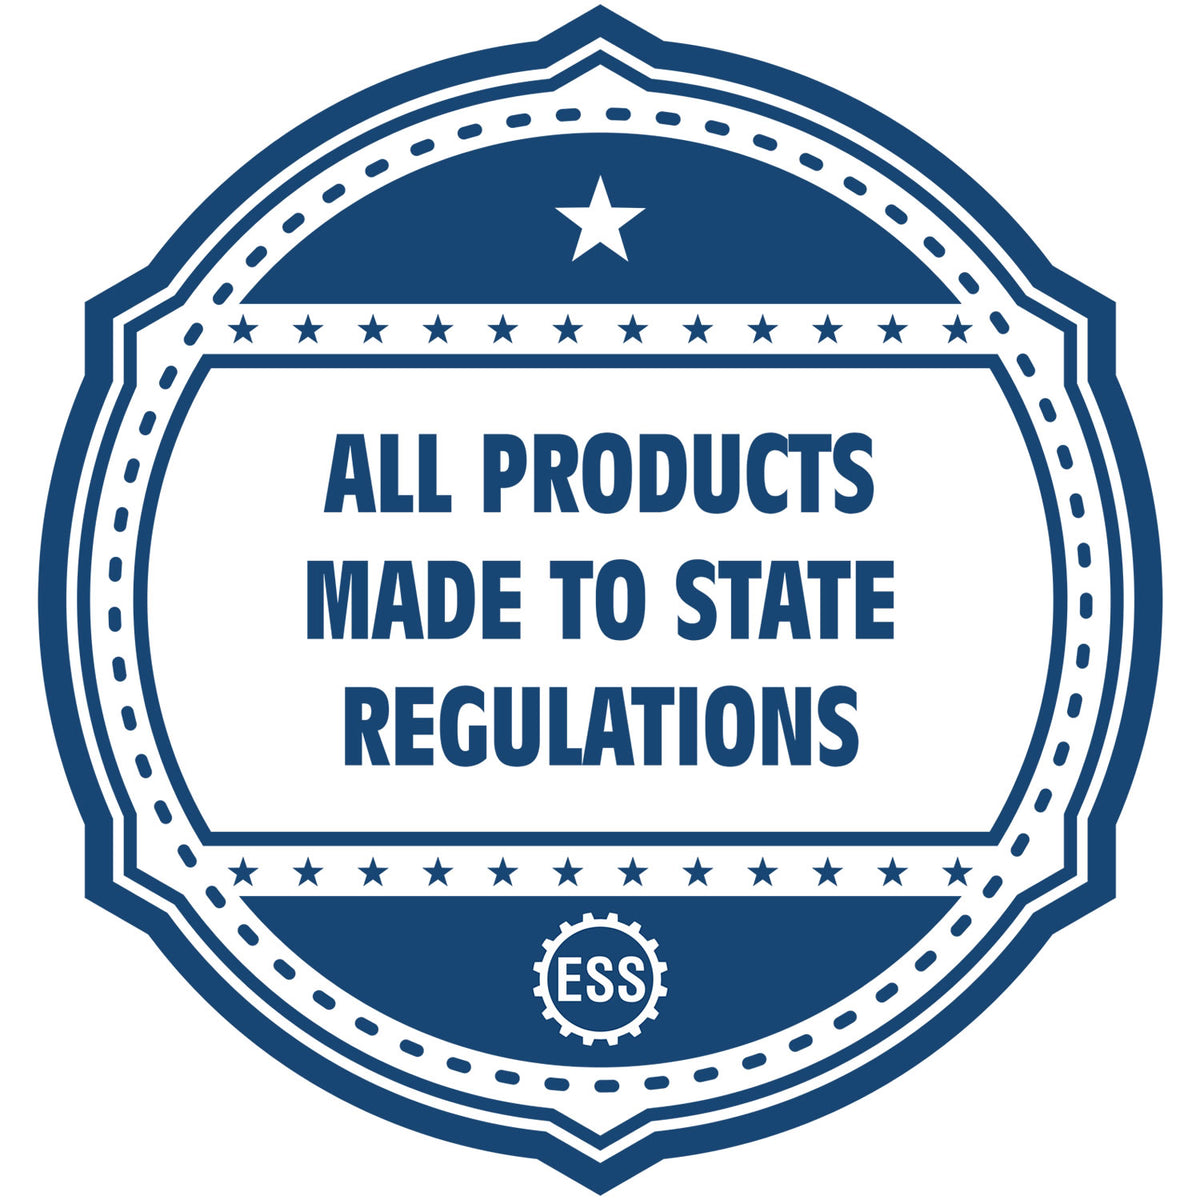 An icon or badge element for the Super Slim North Carolina Notary Public Stamp showing that this product is made in compliance with state regulations.